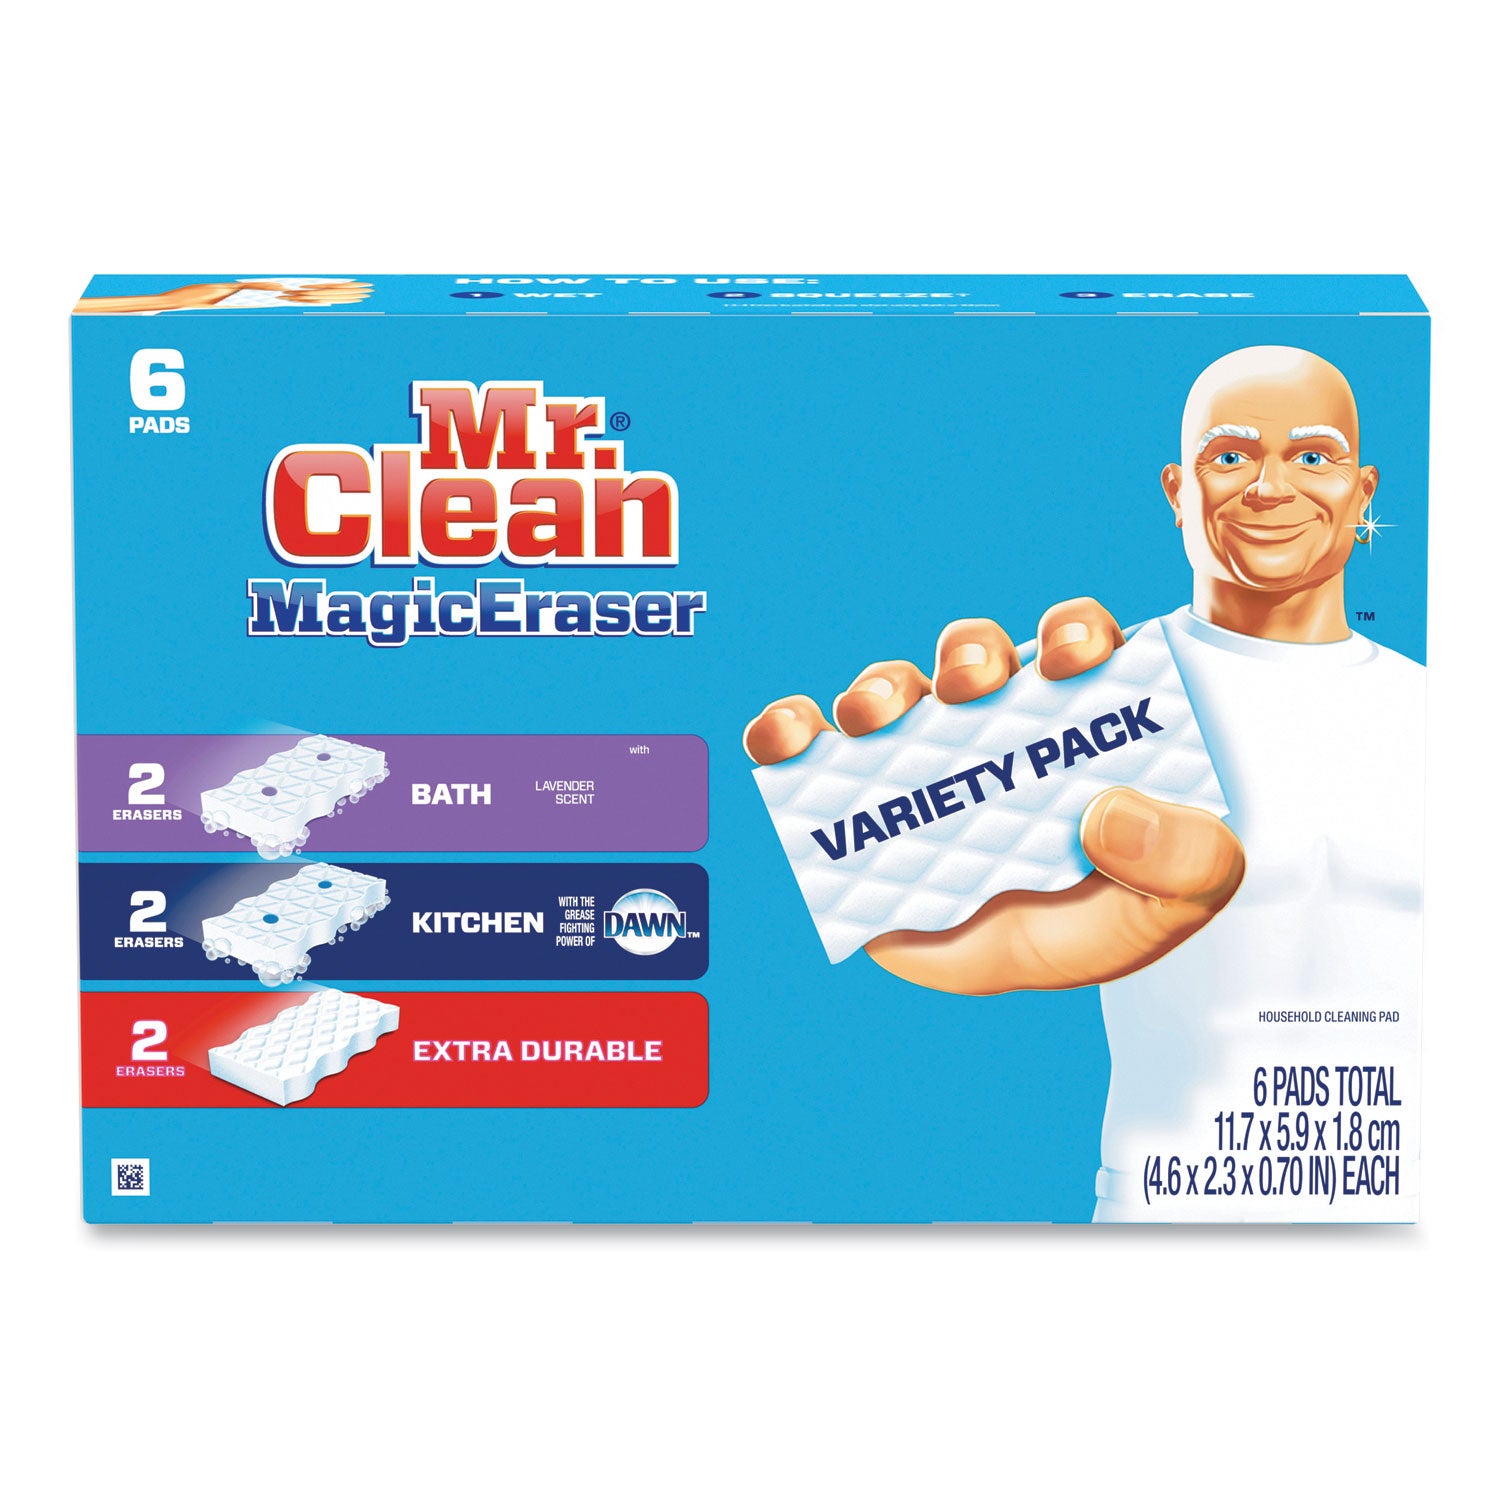 magic-eraser-variety-pack-extra-durable;-bath;-kitchen-46-x-23-07-thick-white-6-pack-8-packs-carton_pgc69523 - 1